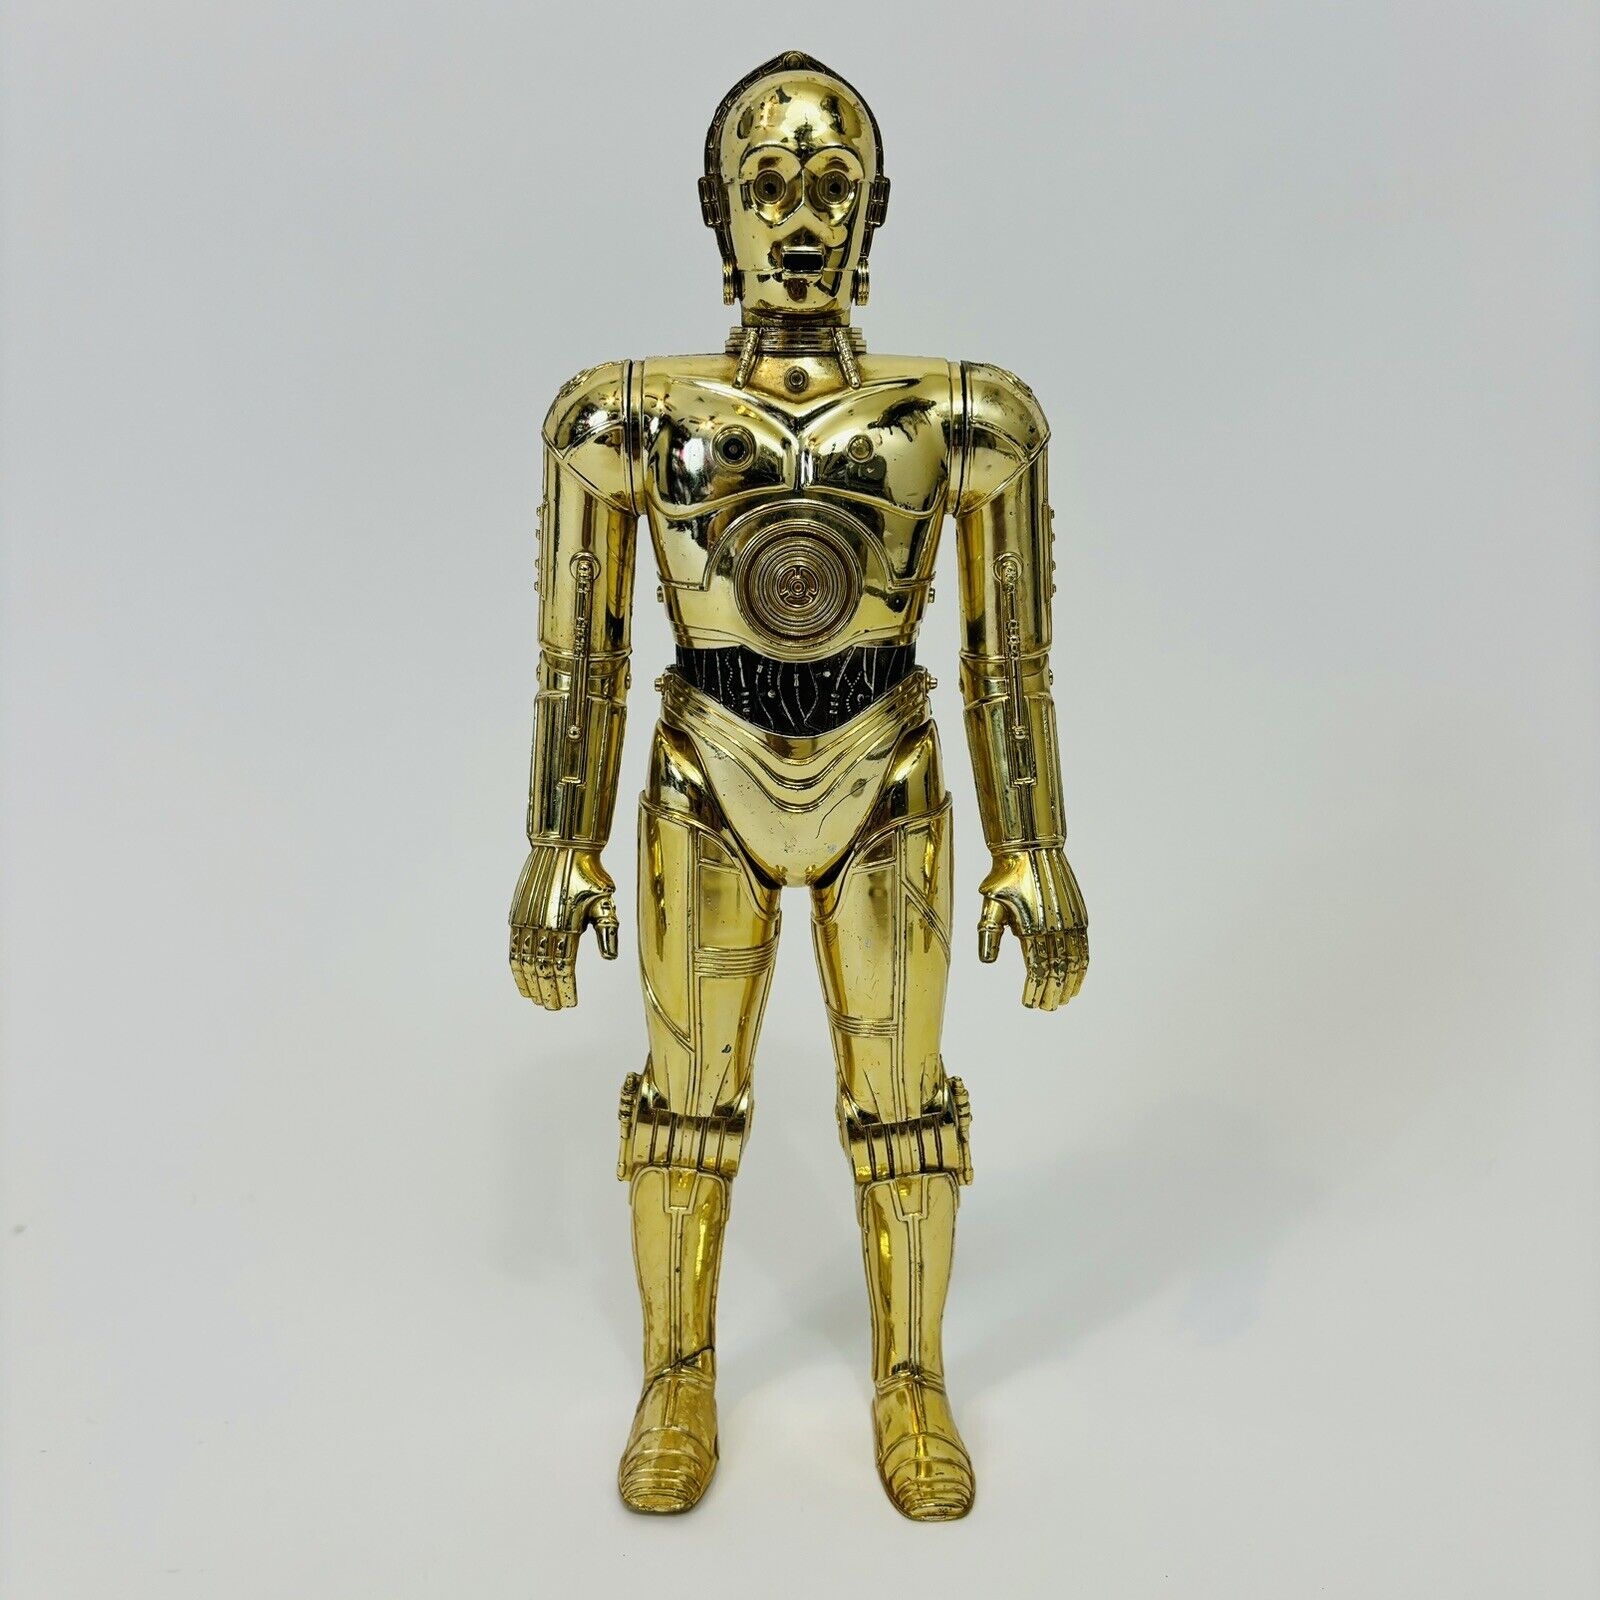 Vintage Star Wars C-3PO General Mills 1978 Loose 12 Inch Droid Action Figure Toy